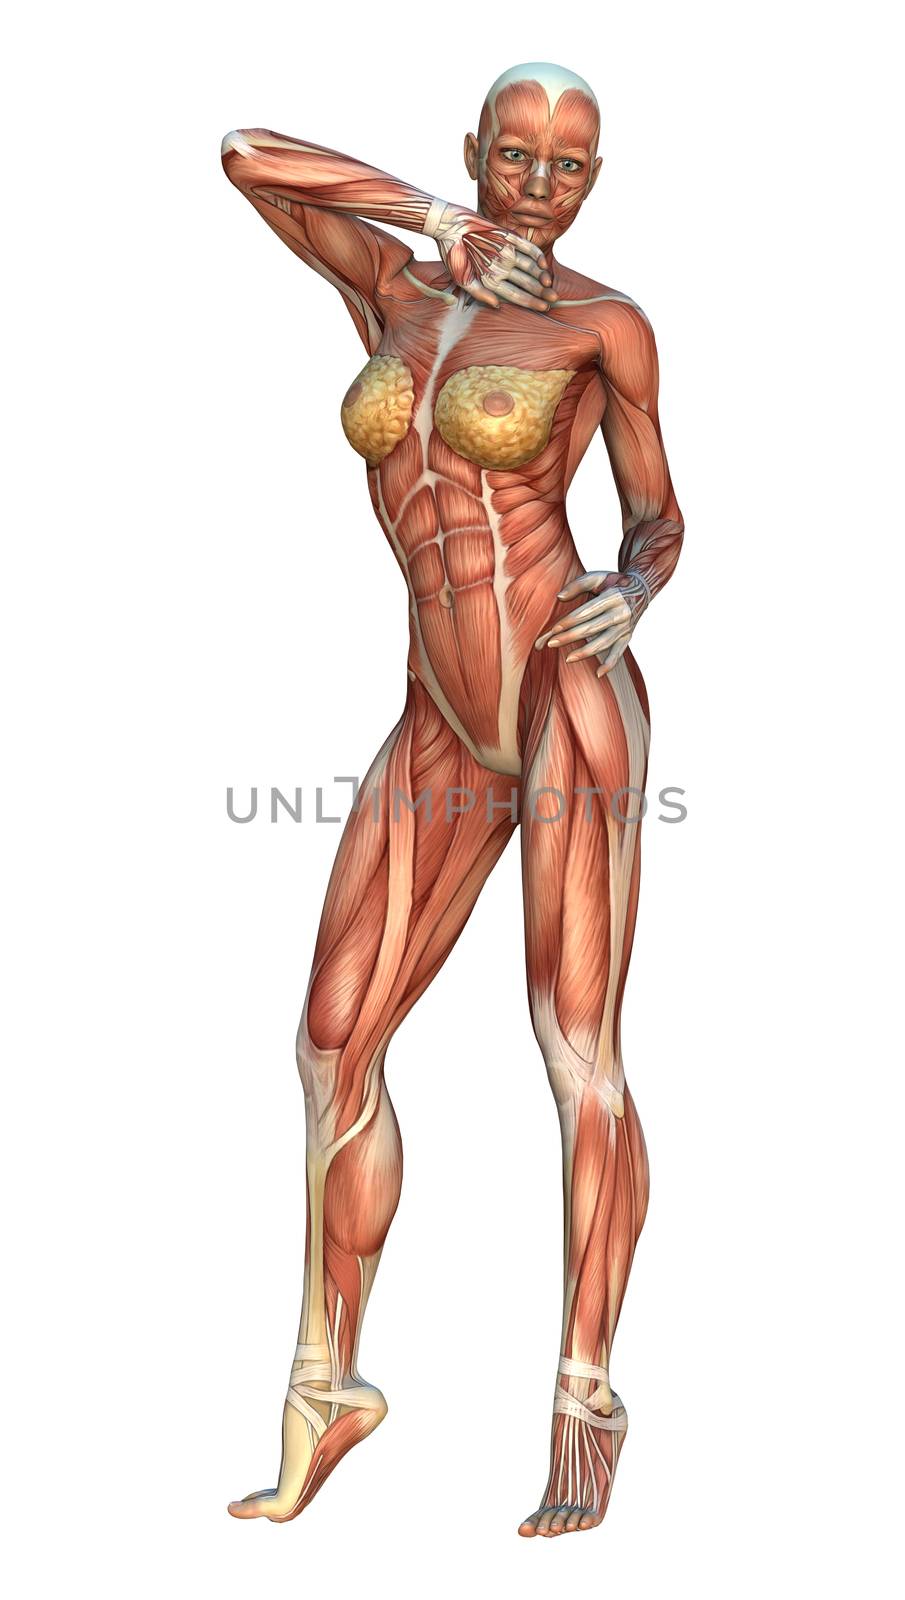 3D digital render of a female figure with muscle maps isolated on white background